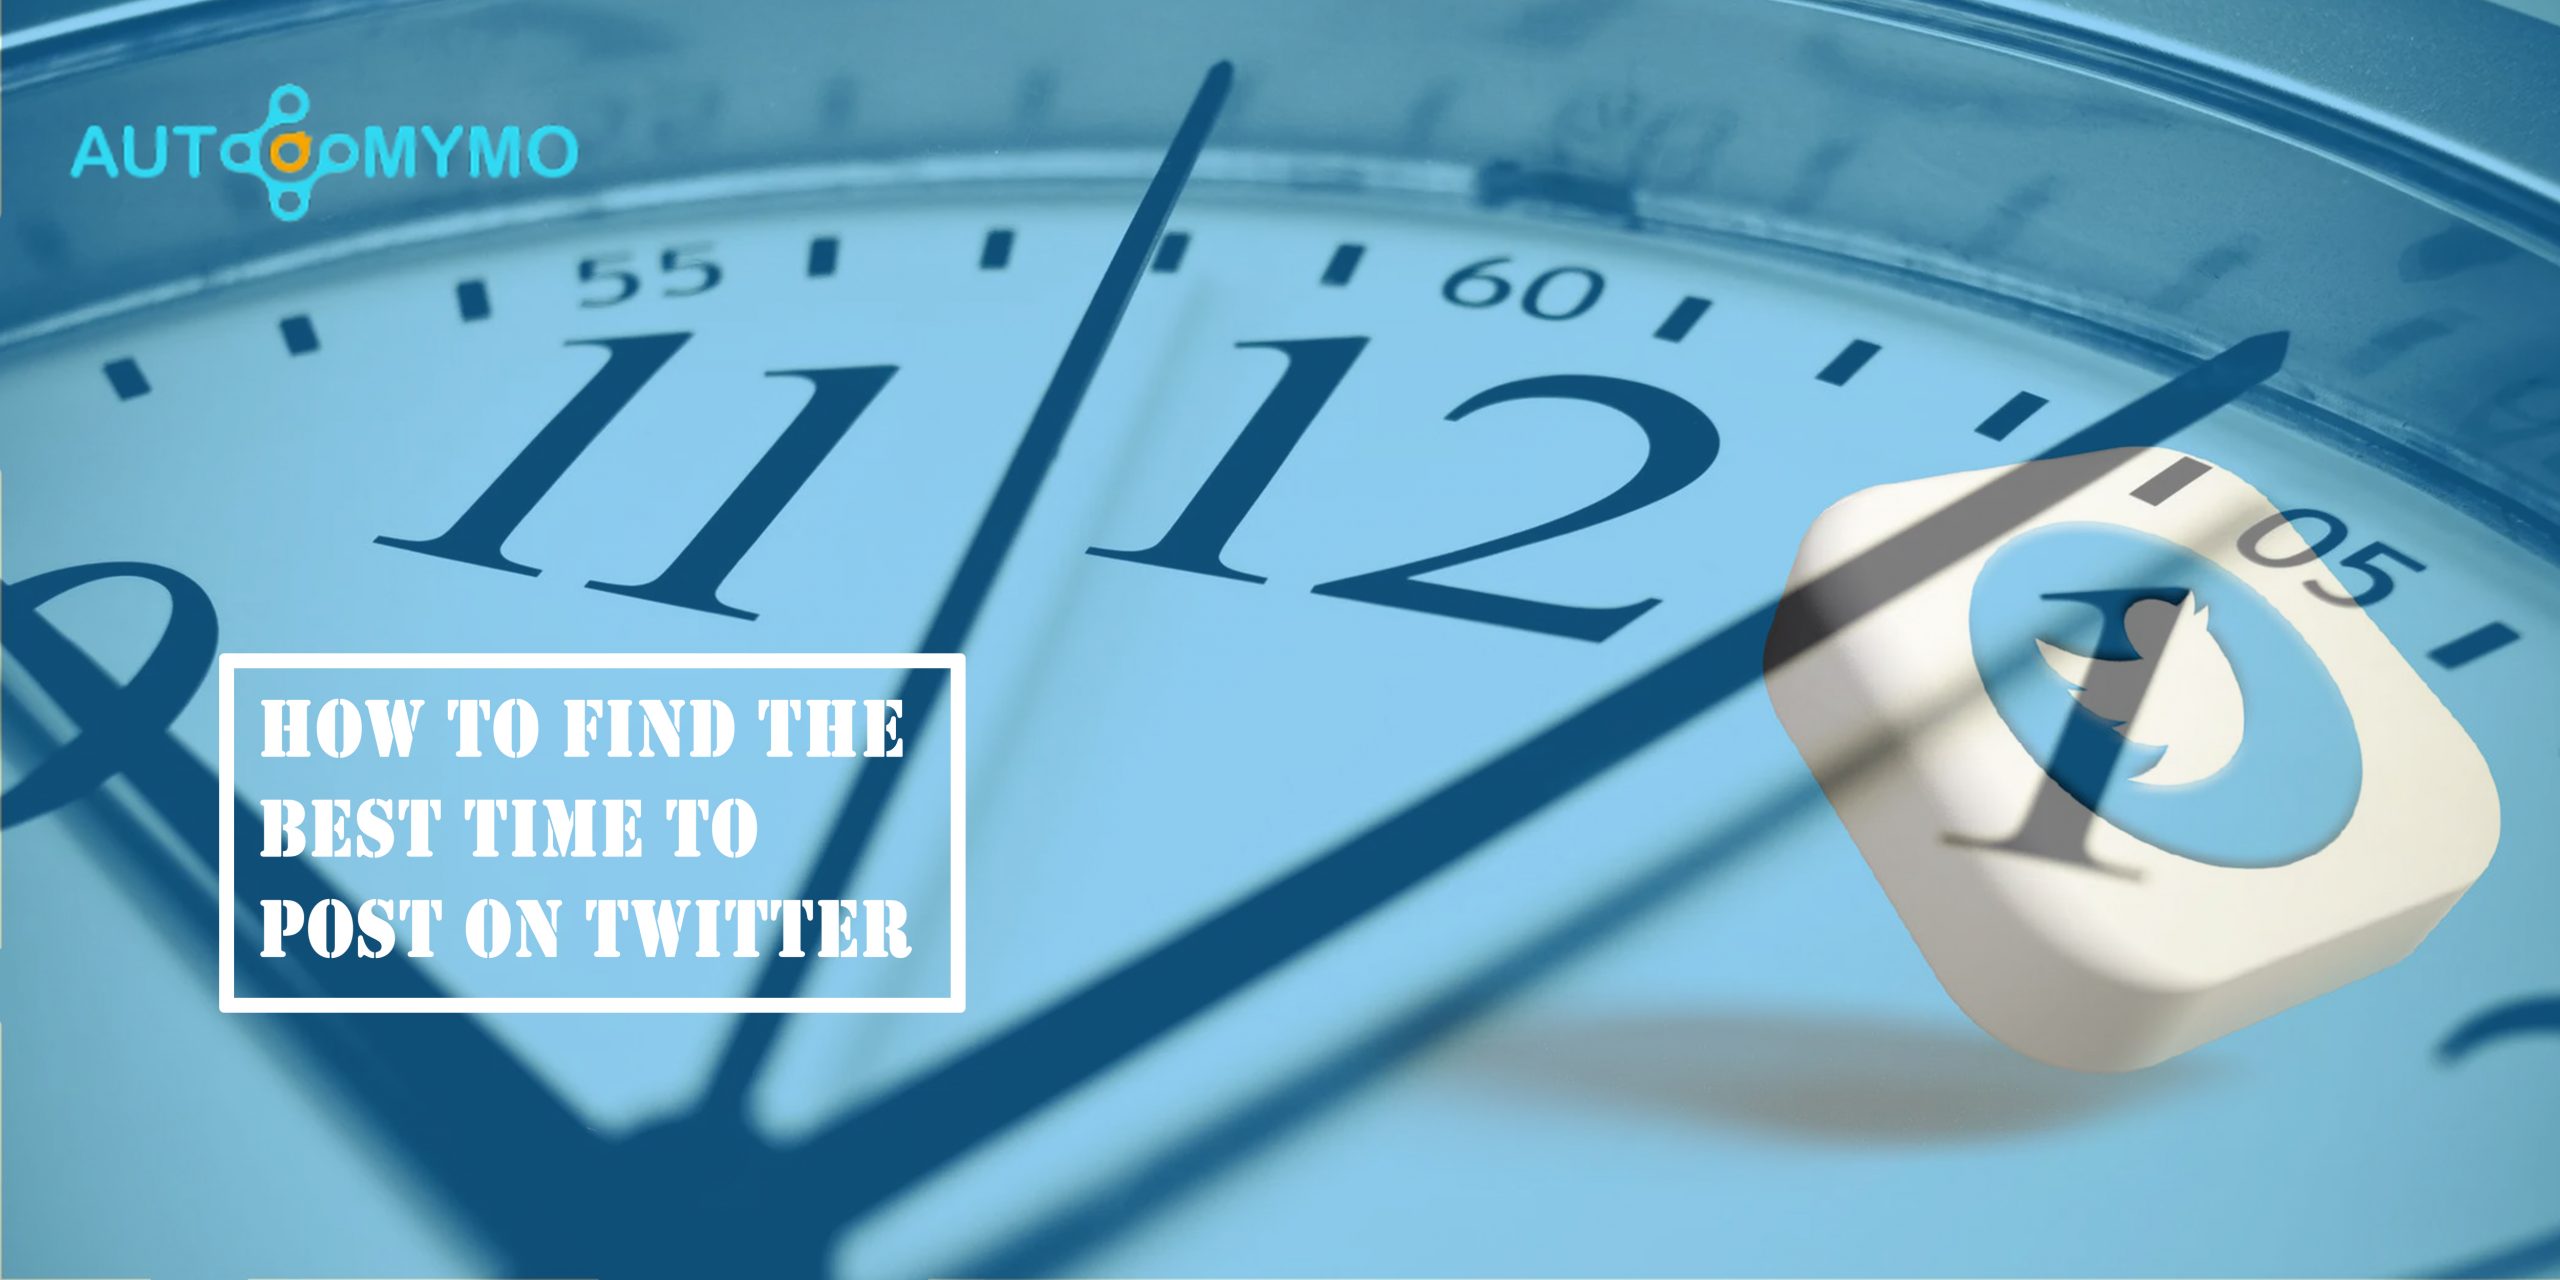 How to Find the Best Time to Post on Twitter